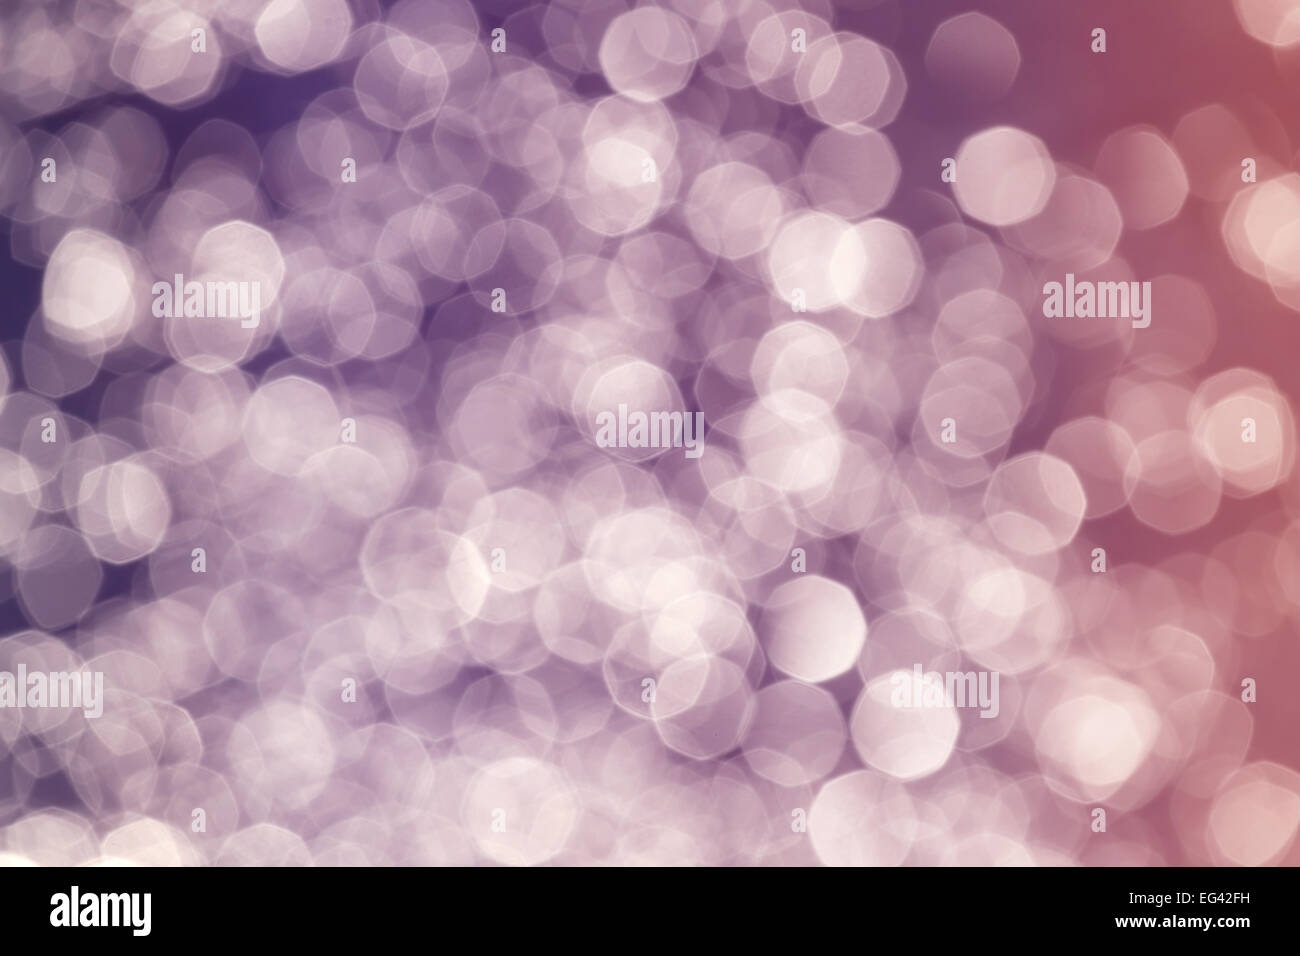 Abstract background made of water reflection bokeh circles. Stock Photo